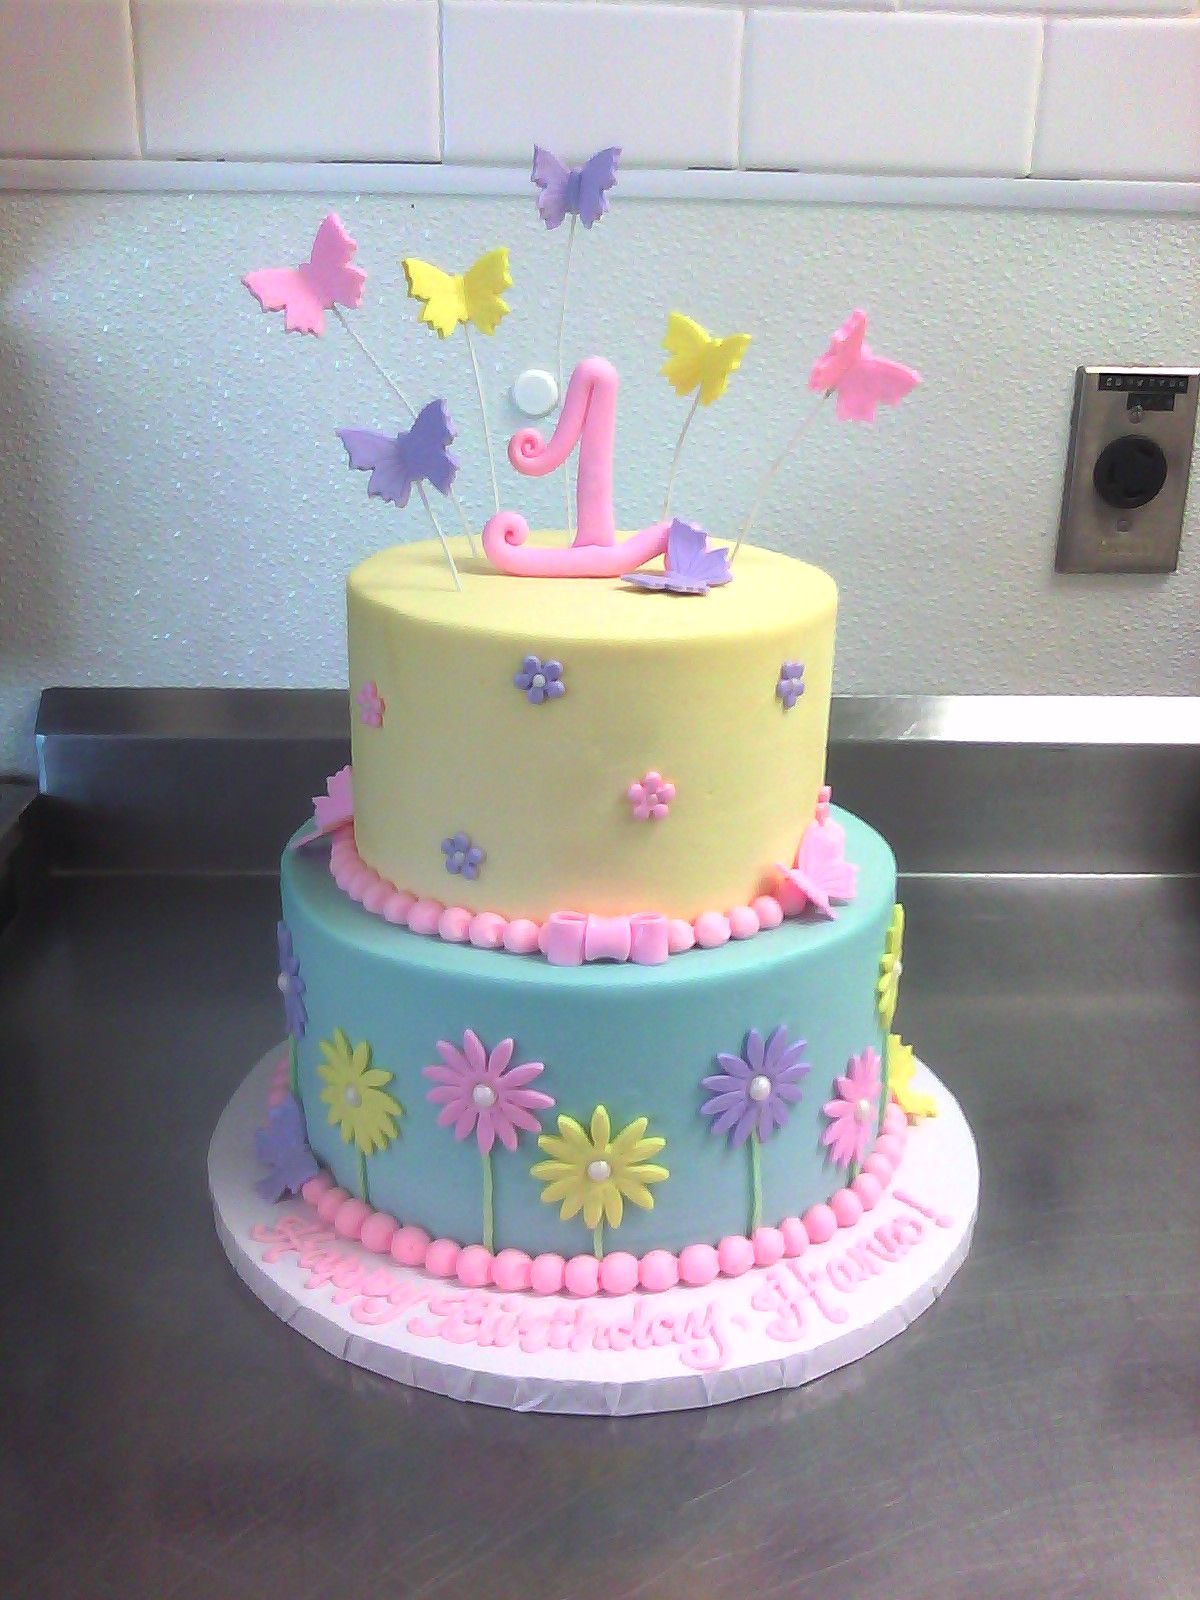 1st Birthday Cake Ideas For Girl
 1st Birthday Cake with Butterflies & Flowers